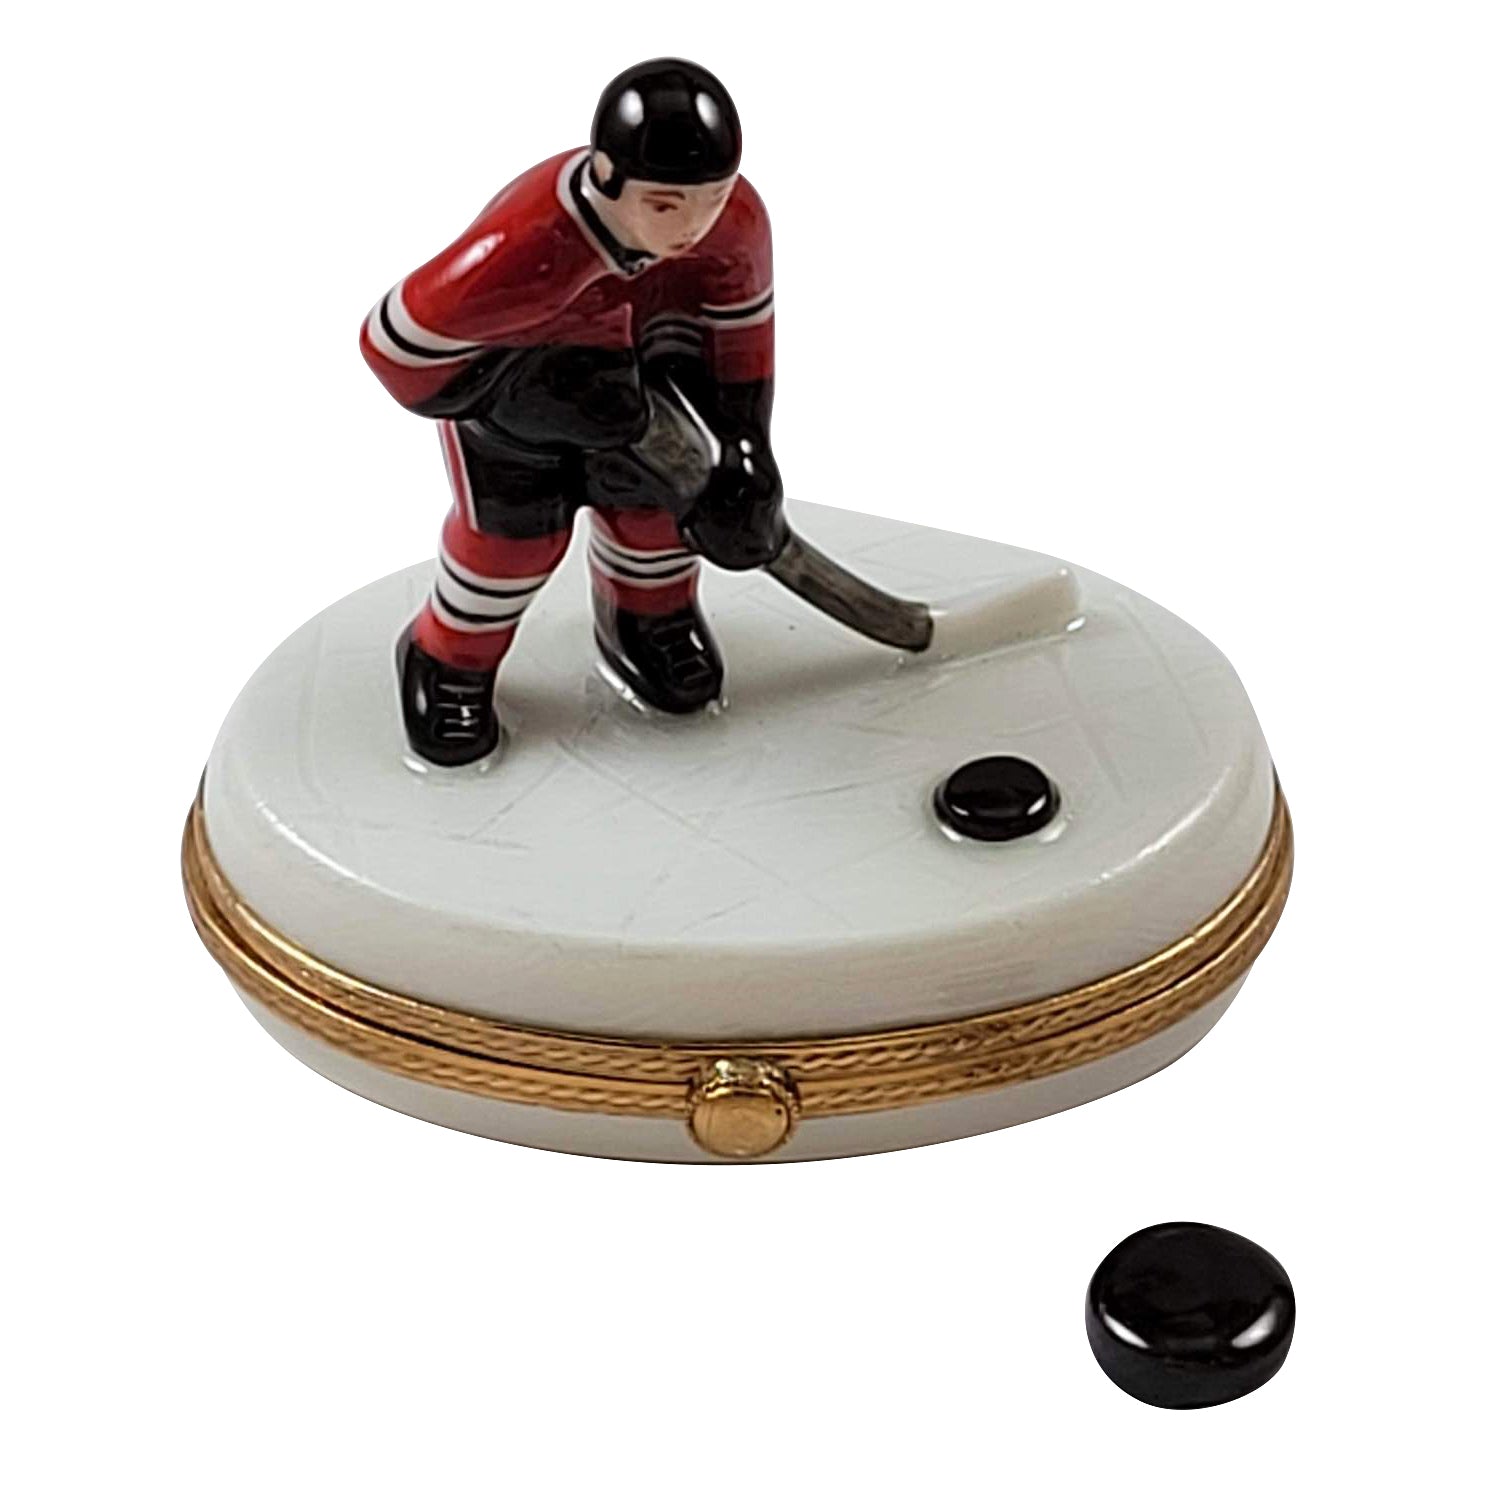 Hockey Player with Removable Puck Limoges Porcelain Box